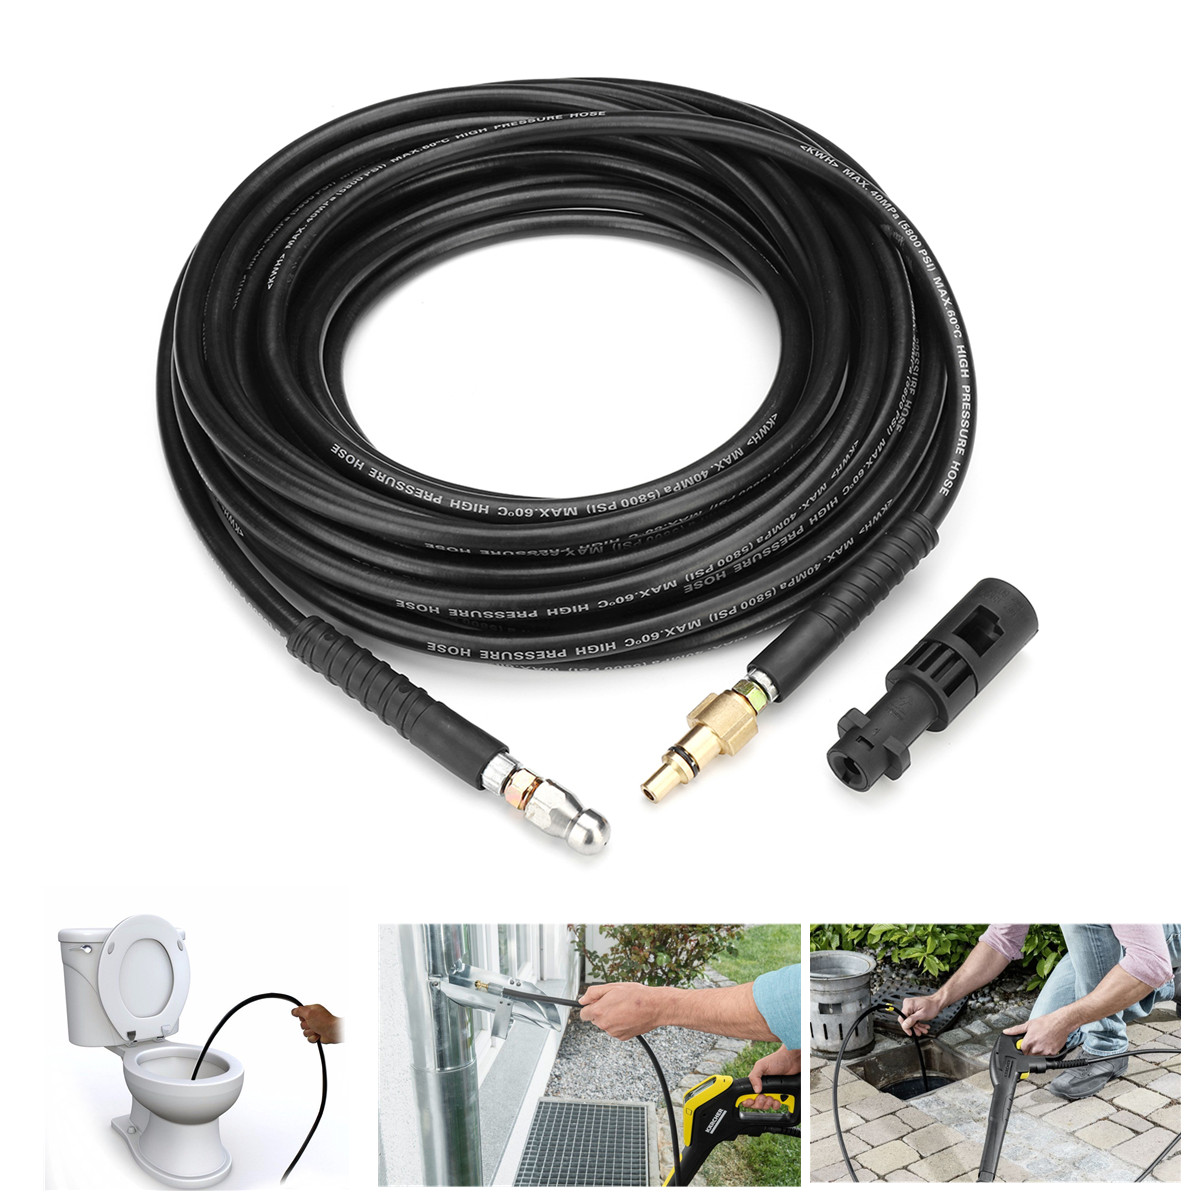 15M-5800PSI-High-Pressure-Washer-Drain-Tube-Cleaning-Hose-Kit-Pipe-Cleaner-Unblocker-1396553-1